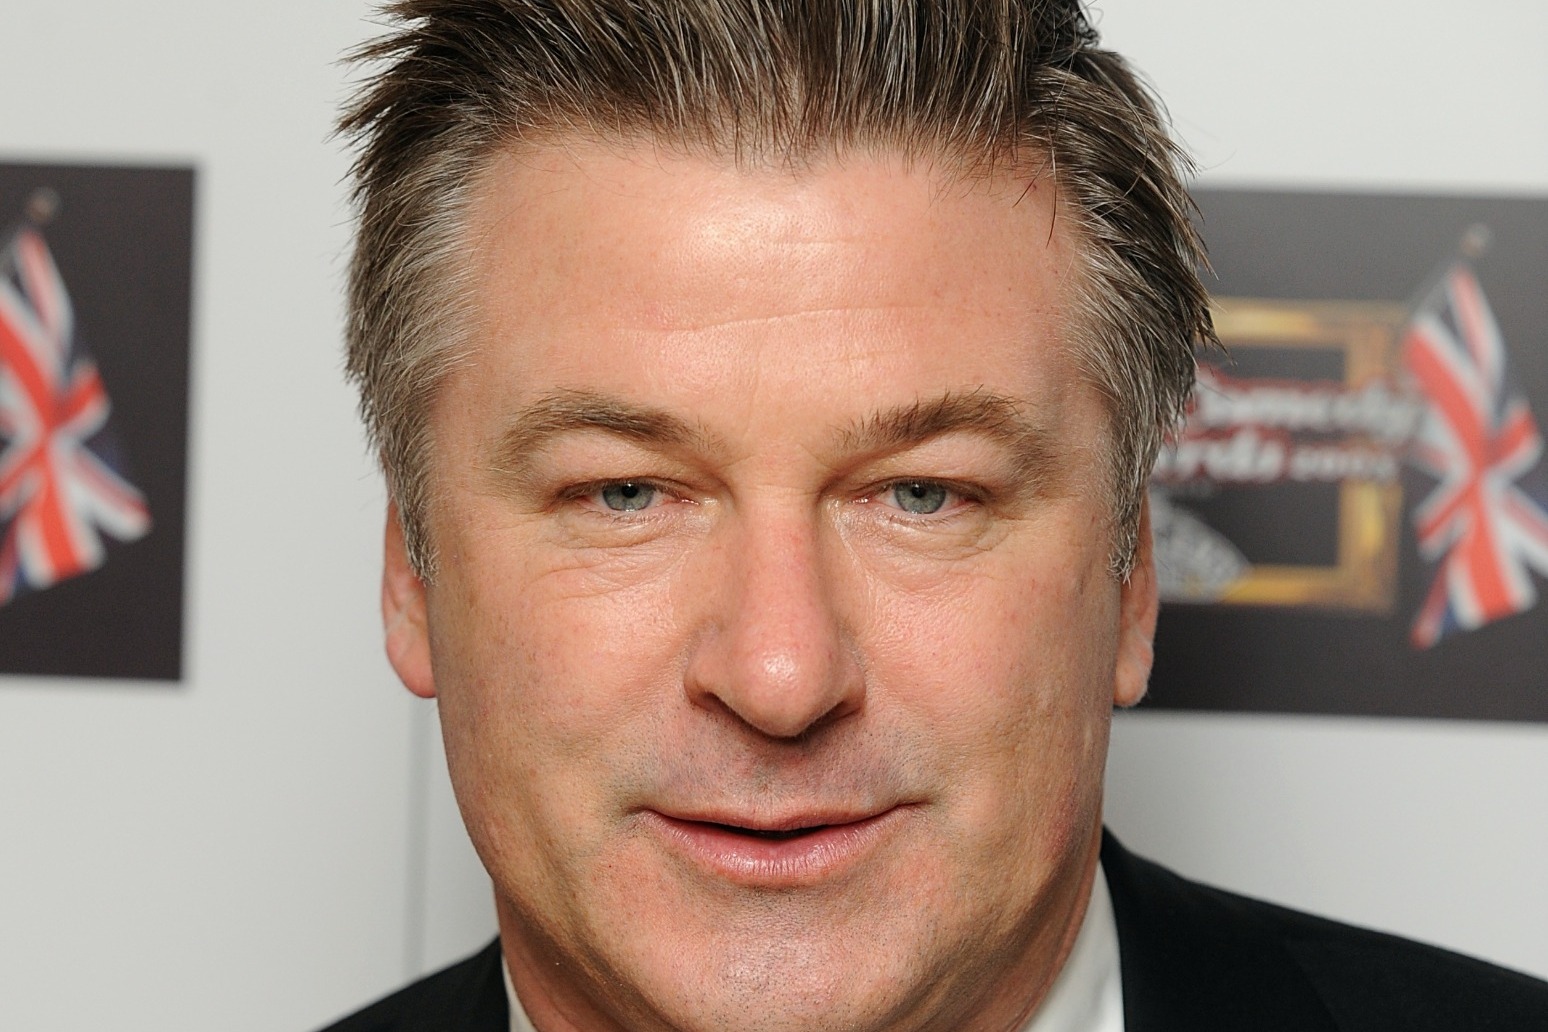 New footage shows Alec Baldwin practising with gun ahead of fatal Rust shooting 